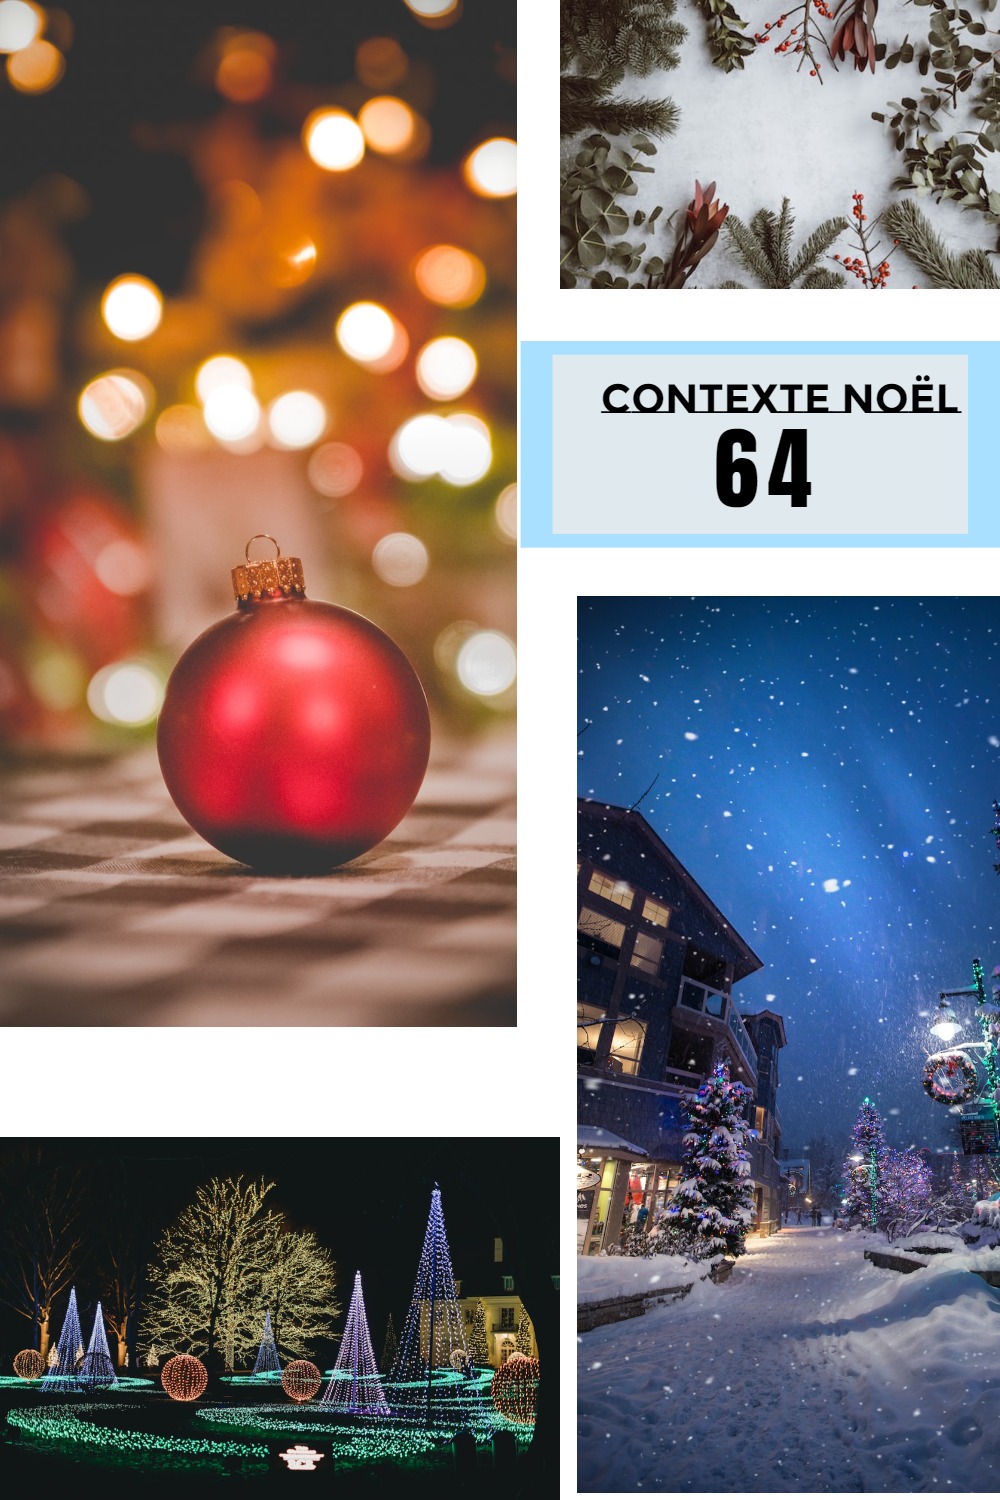 This bundle contains 64 festive JPG images of Christmas backgrounds that are sure to enchant you during the holiday season pinterest preview image.